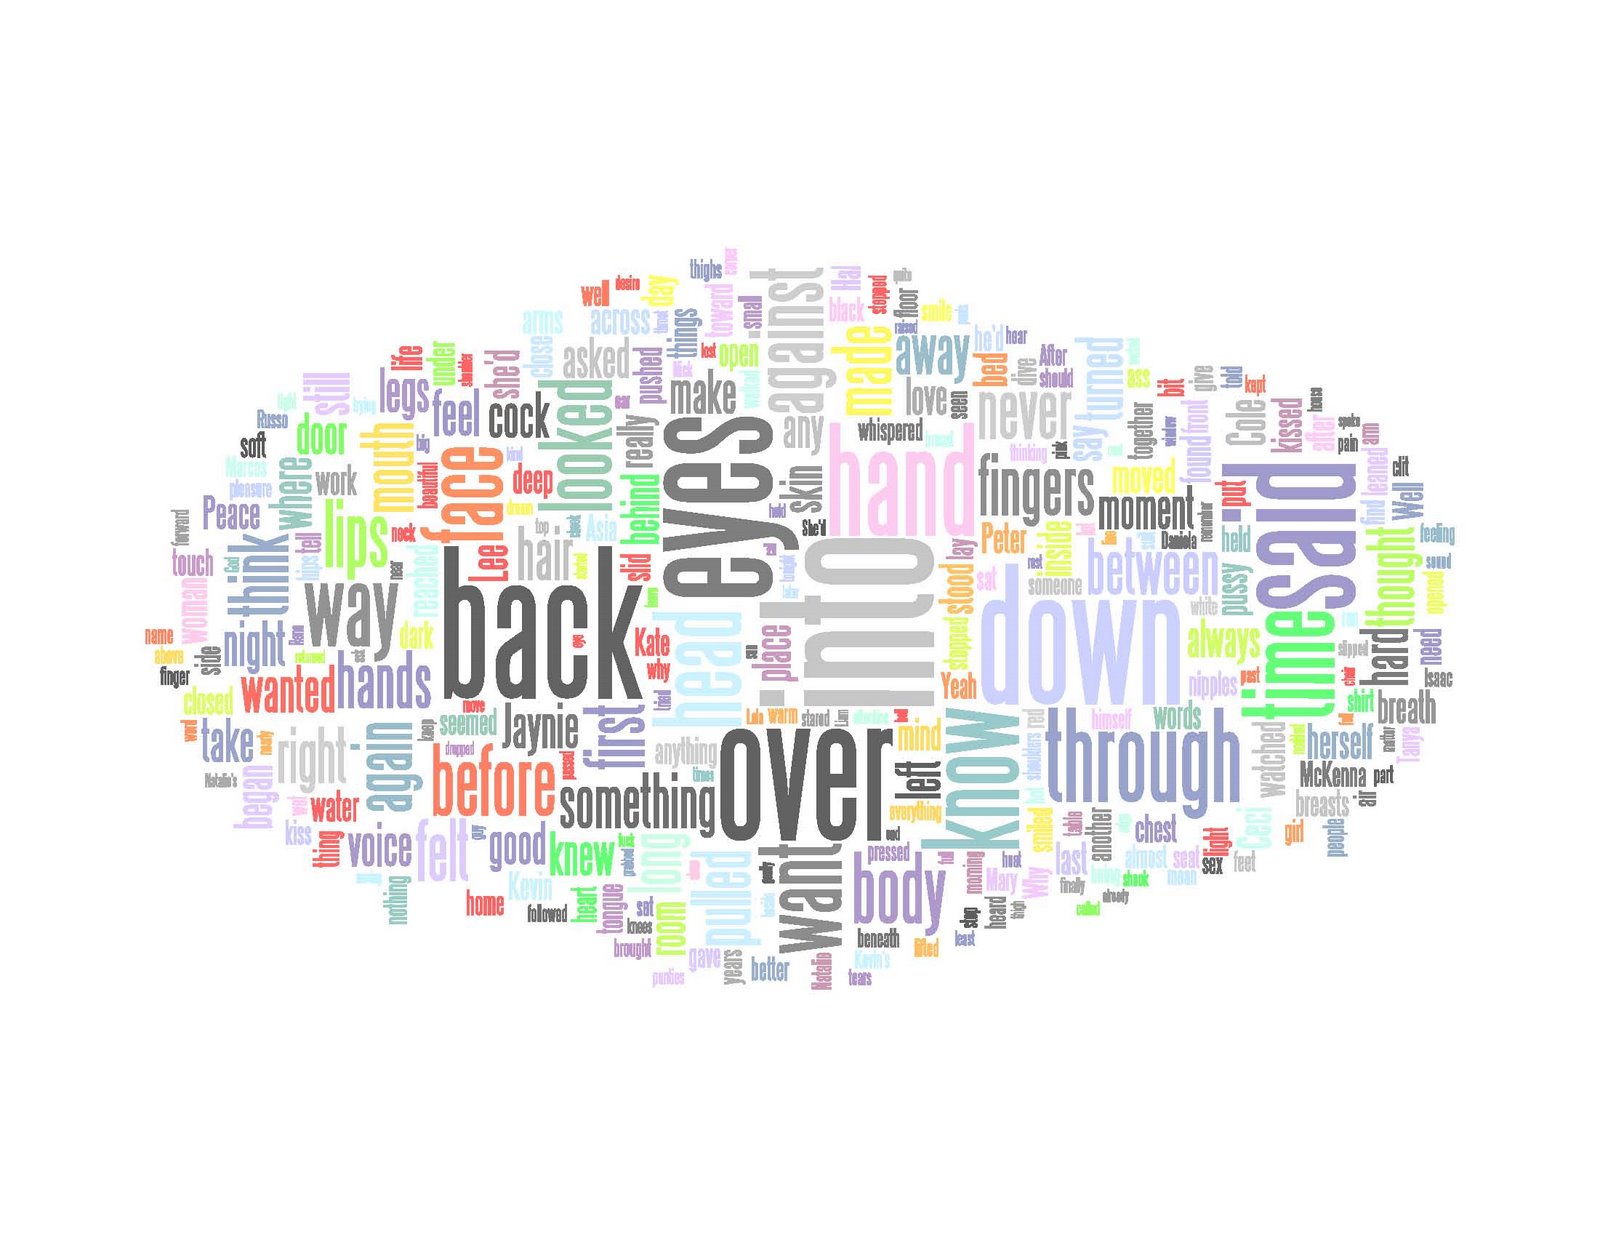 [Wordle+-+Coming+Together+(For+the+Cure).jpg]